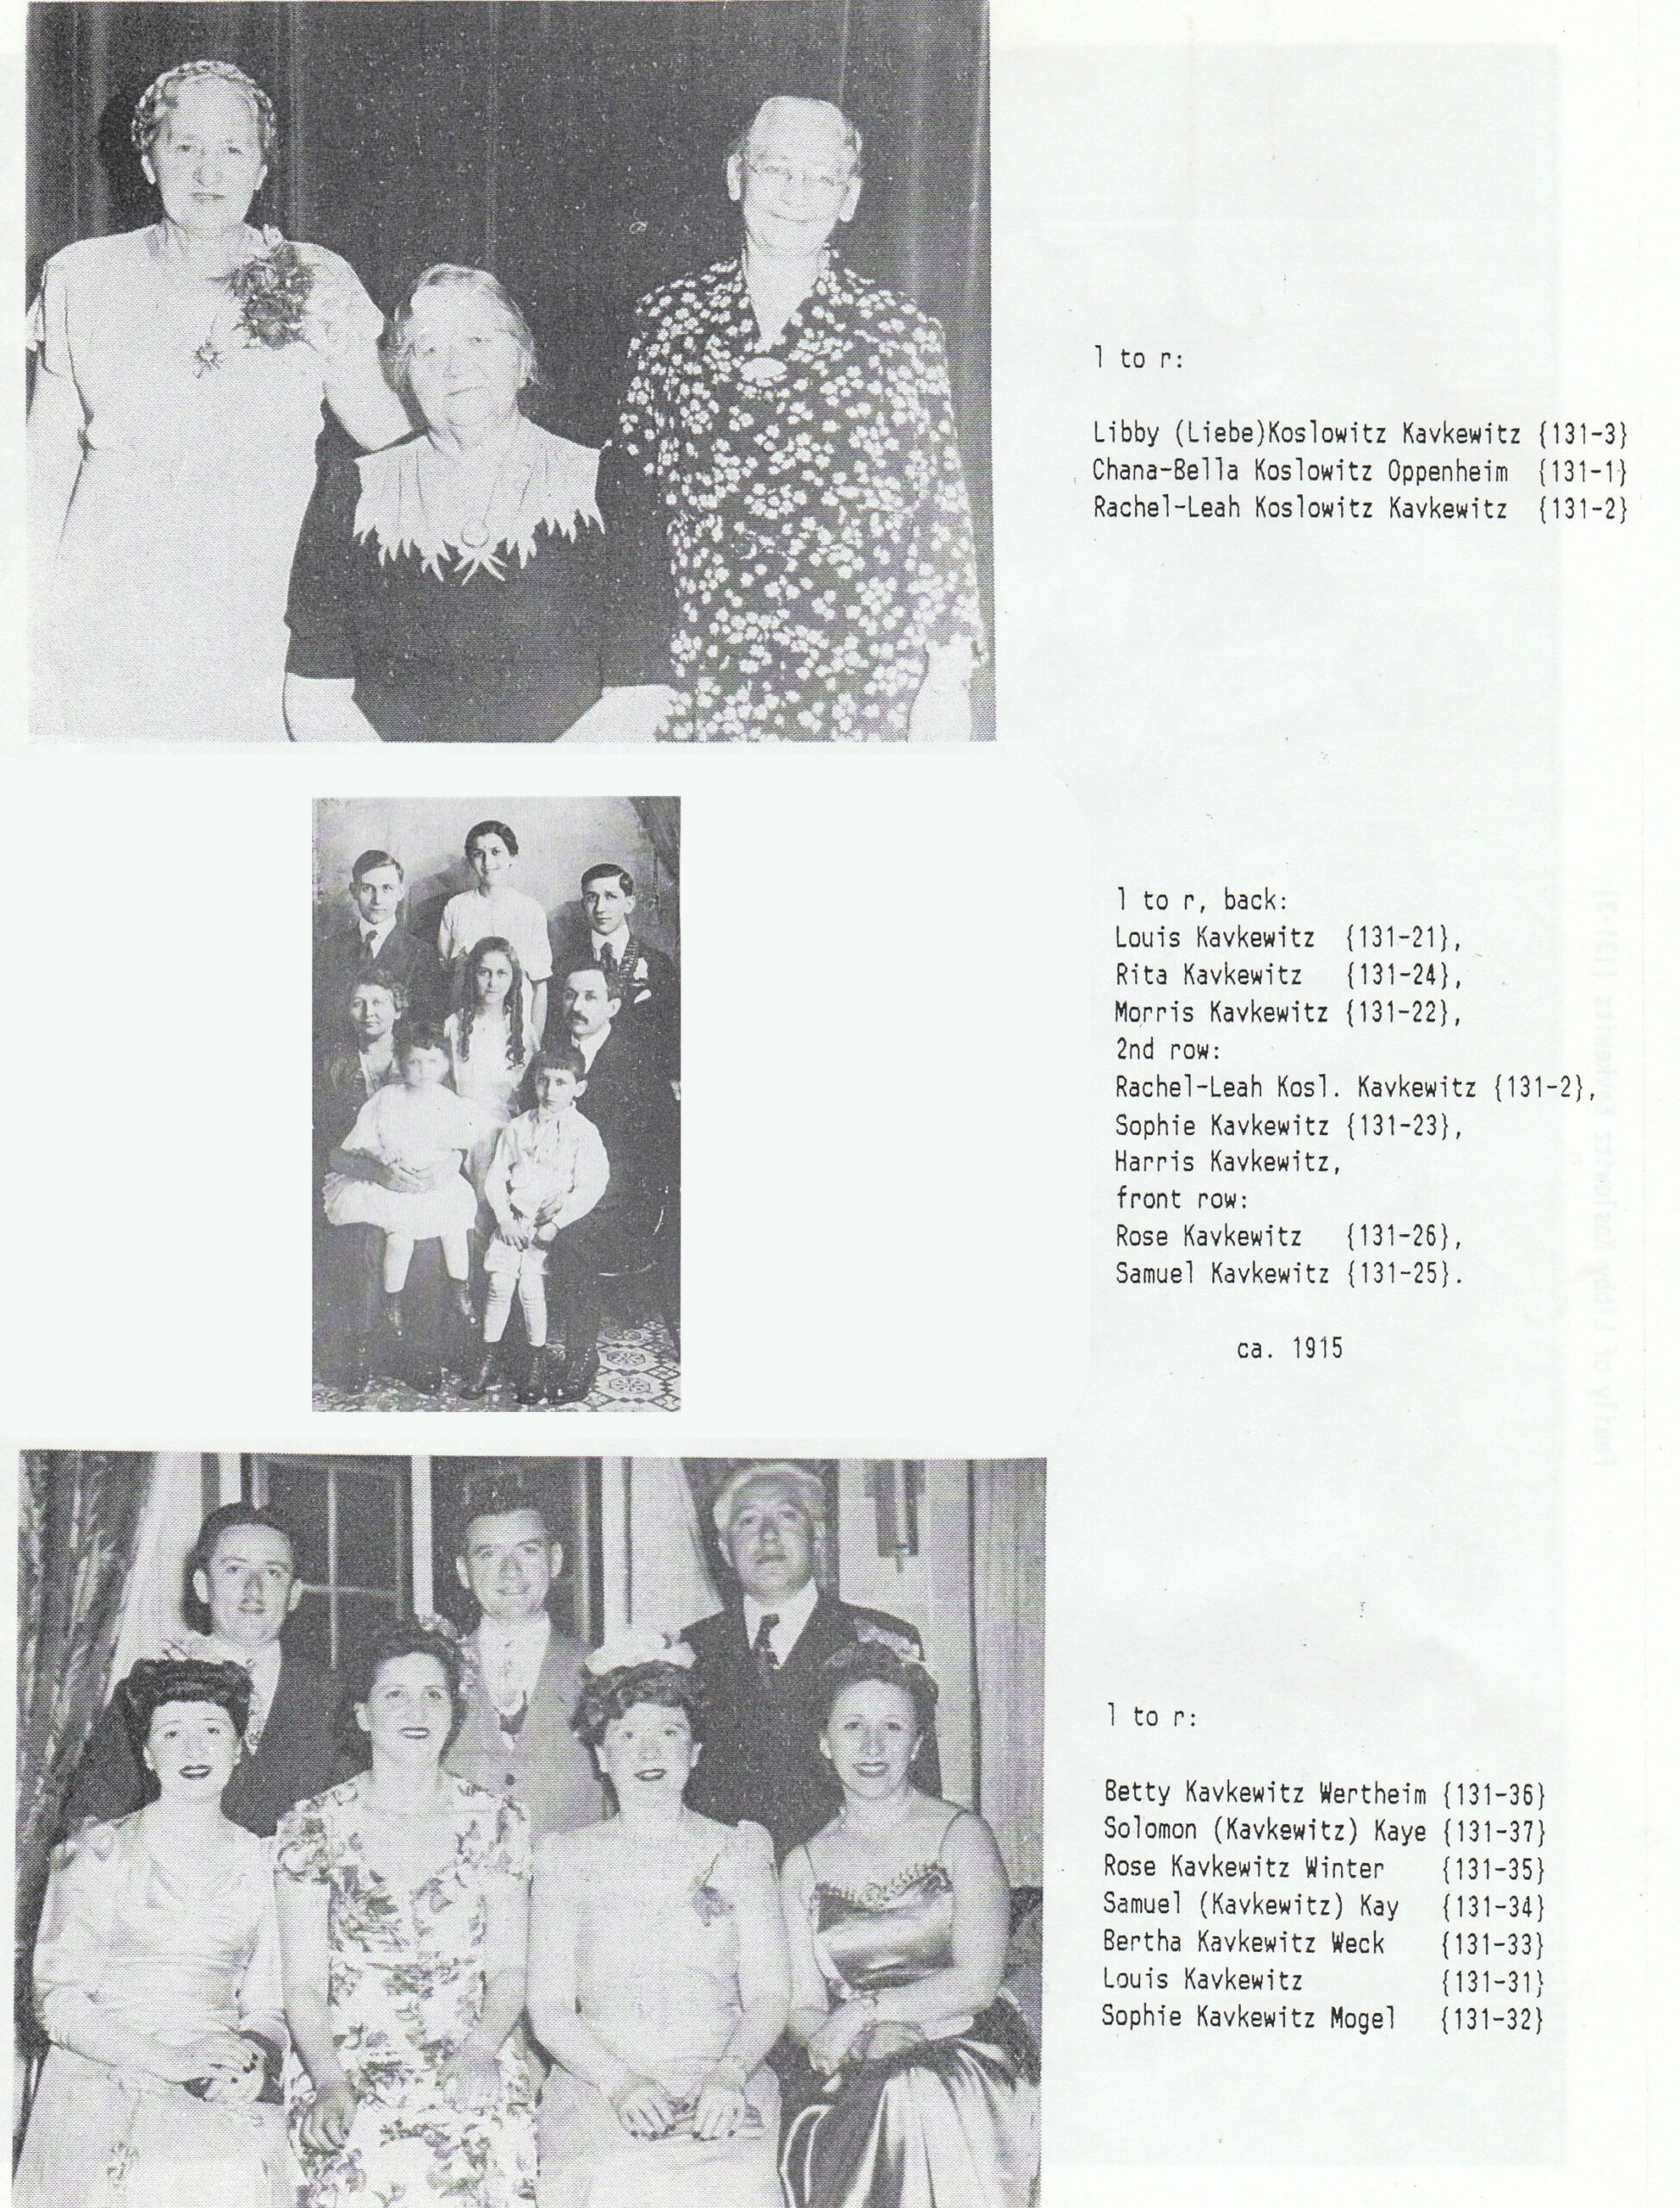 The organizer of the reunion weekend in 1989 put together a booklet all about the individual families that made up the larger group. These photos from the booklet show my maternal grandmother's family.